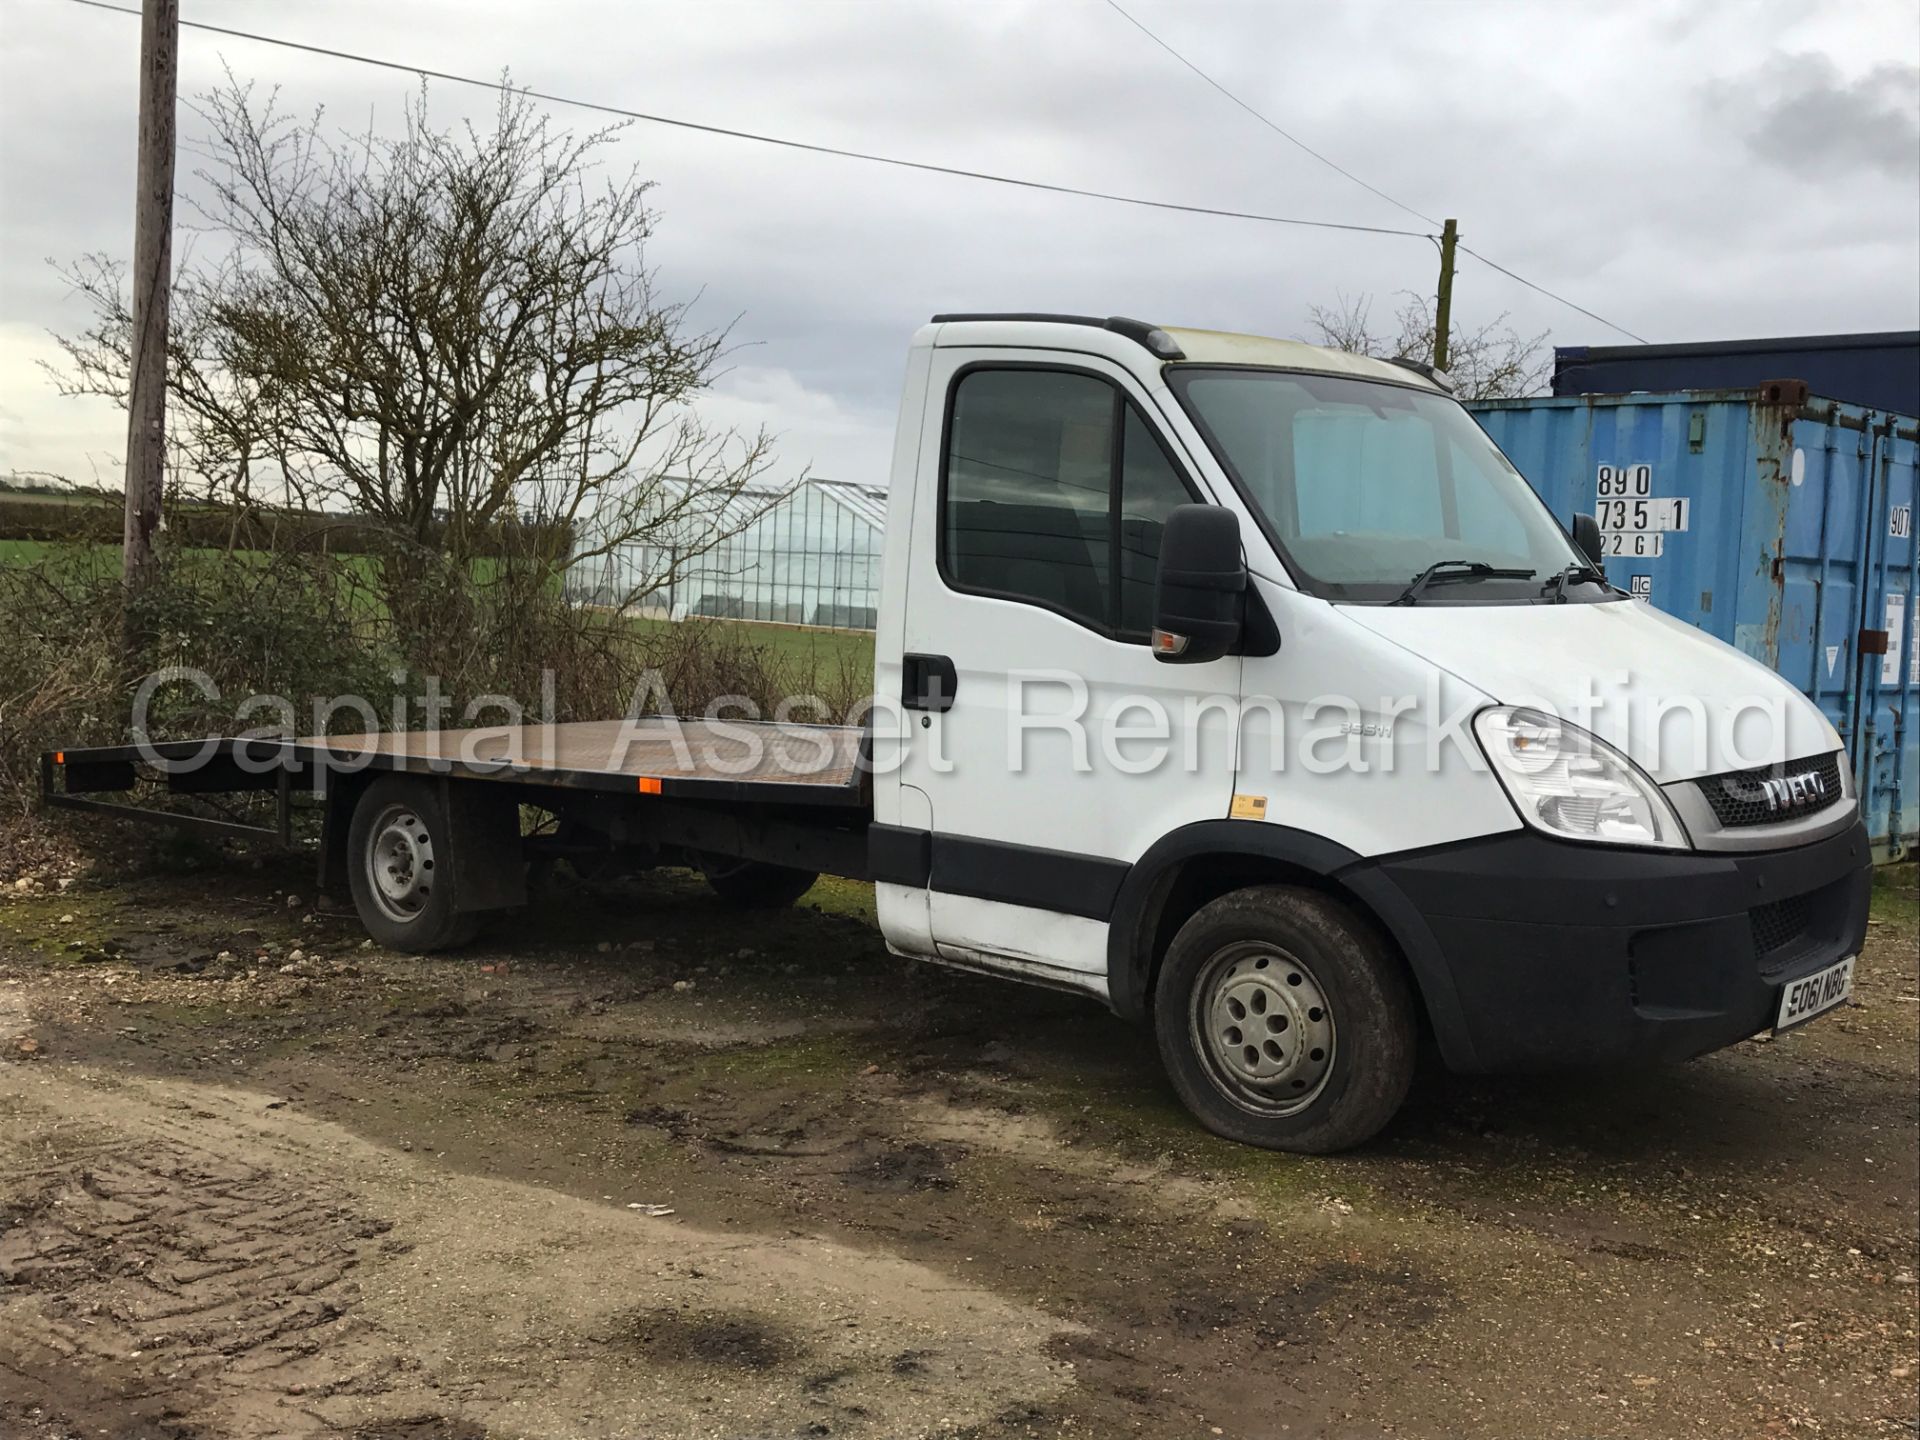 (On Sale) IVECO DAILY 35S11 '16 FT RECOVERY TRUCK' (2012 MODEL) *BRAND NEW BODY* (1 OWNER FROM NEW)